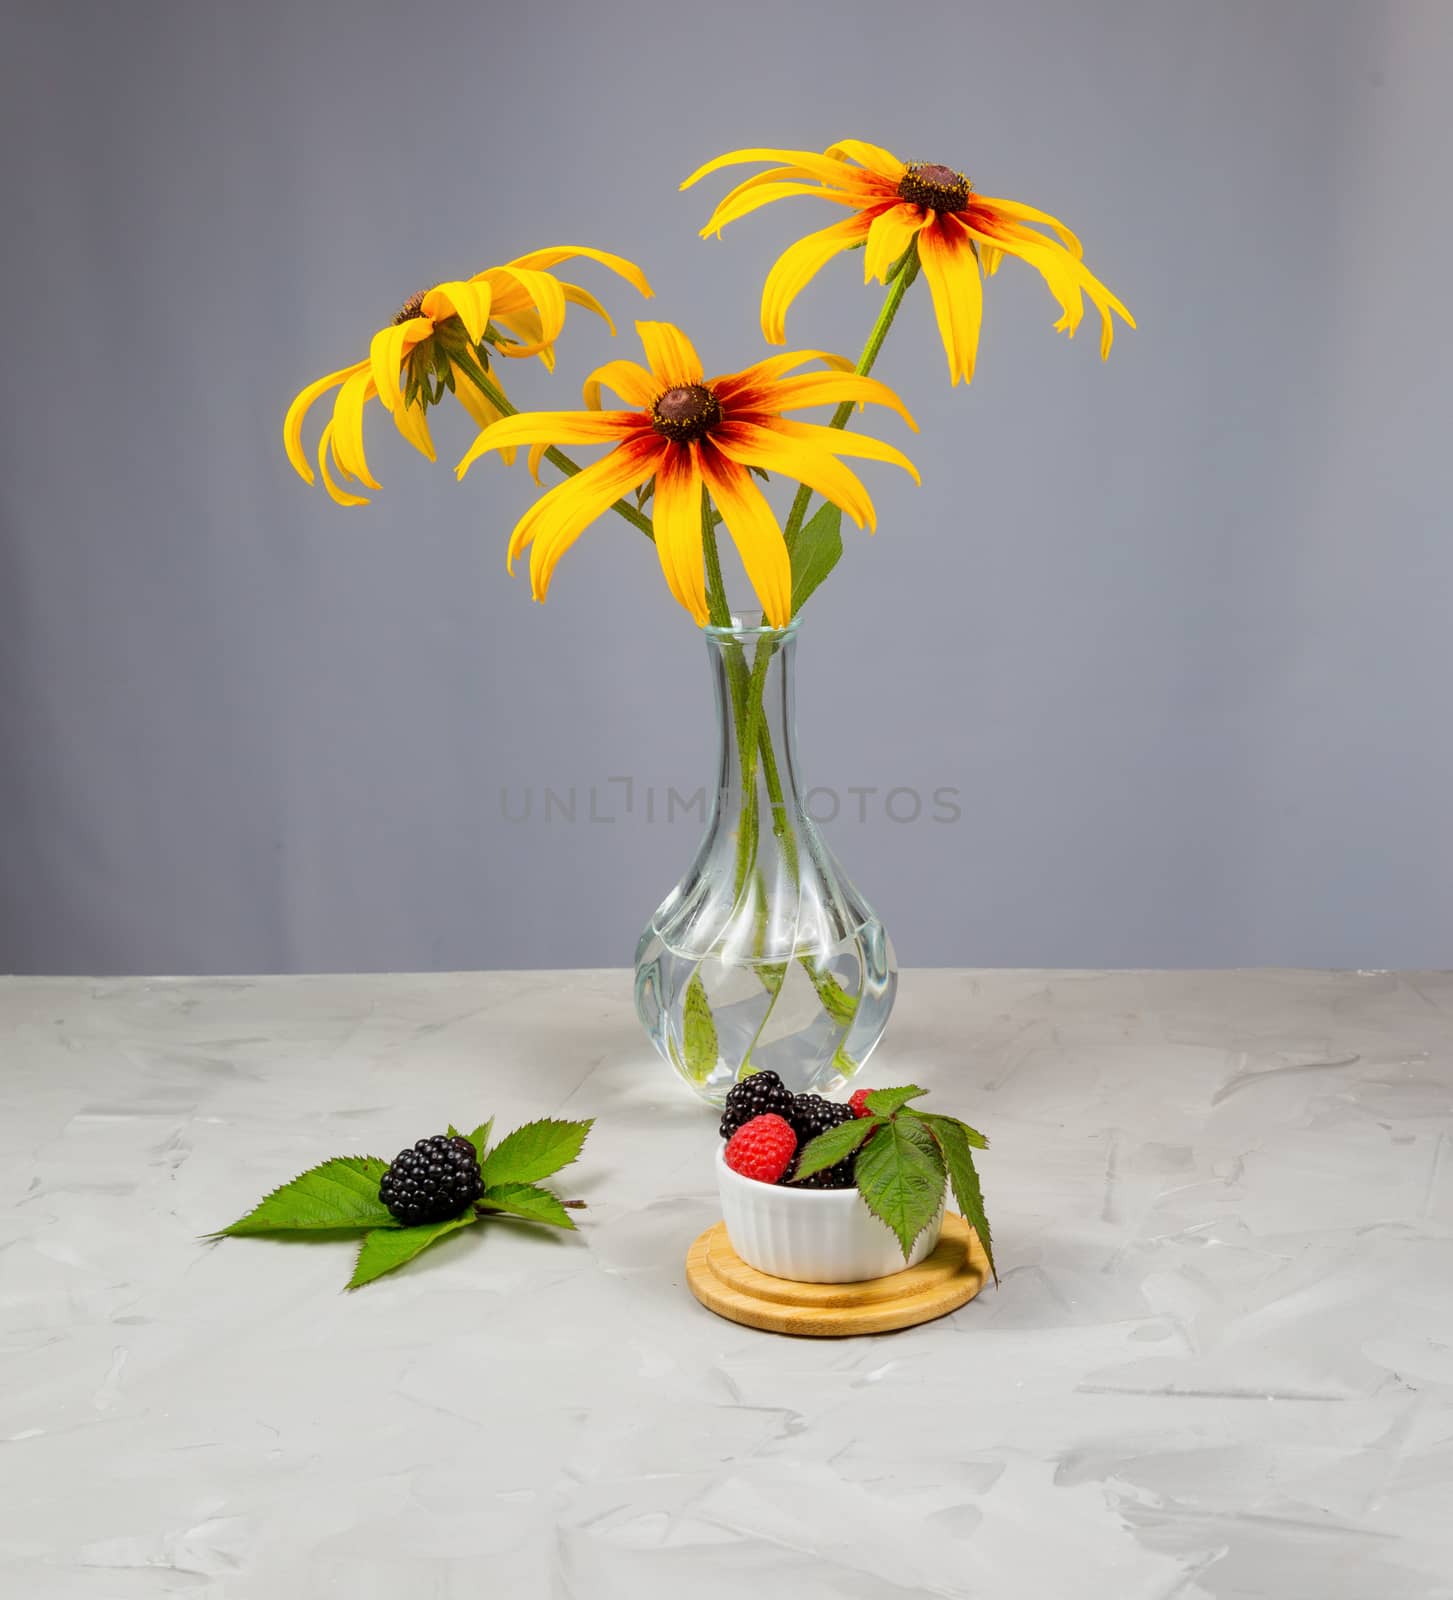 rudbeckia flowers in a transparent vase on a gray concrete table by galinasharapova